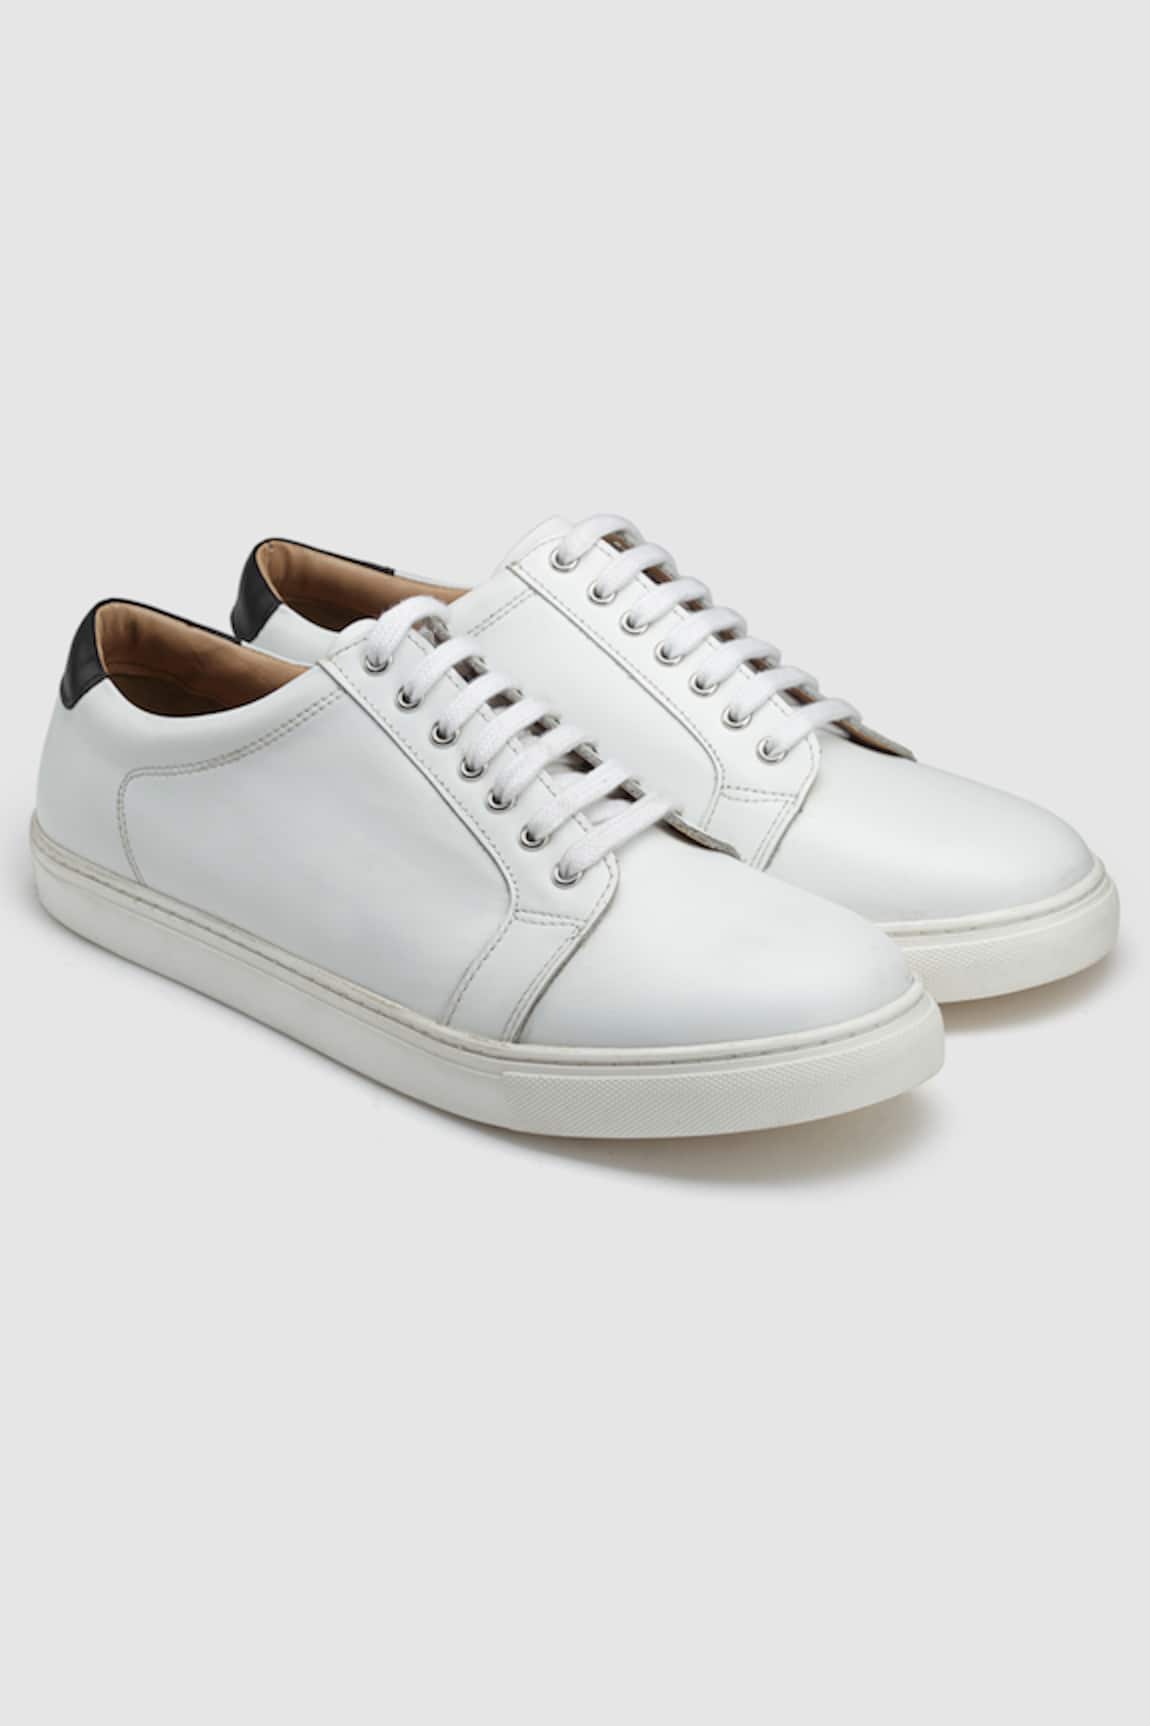 Hats Off Accessories Leather Round Toe Sneakers